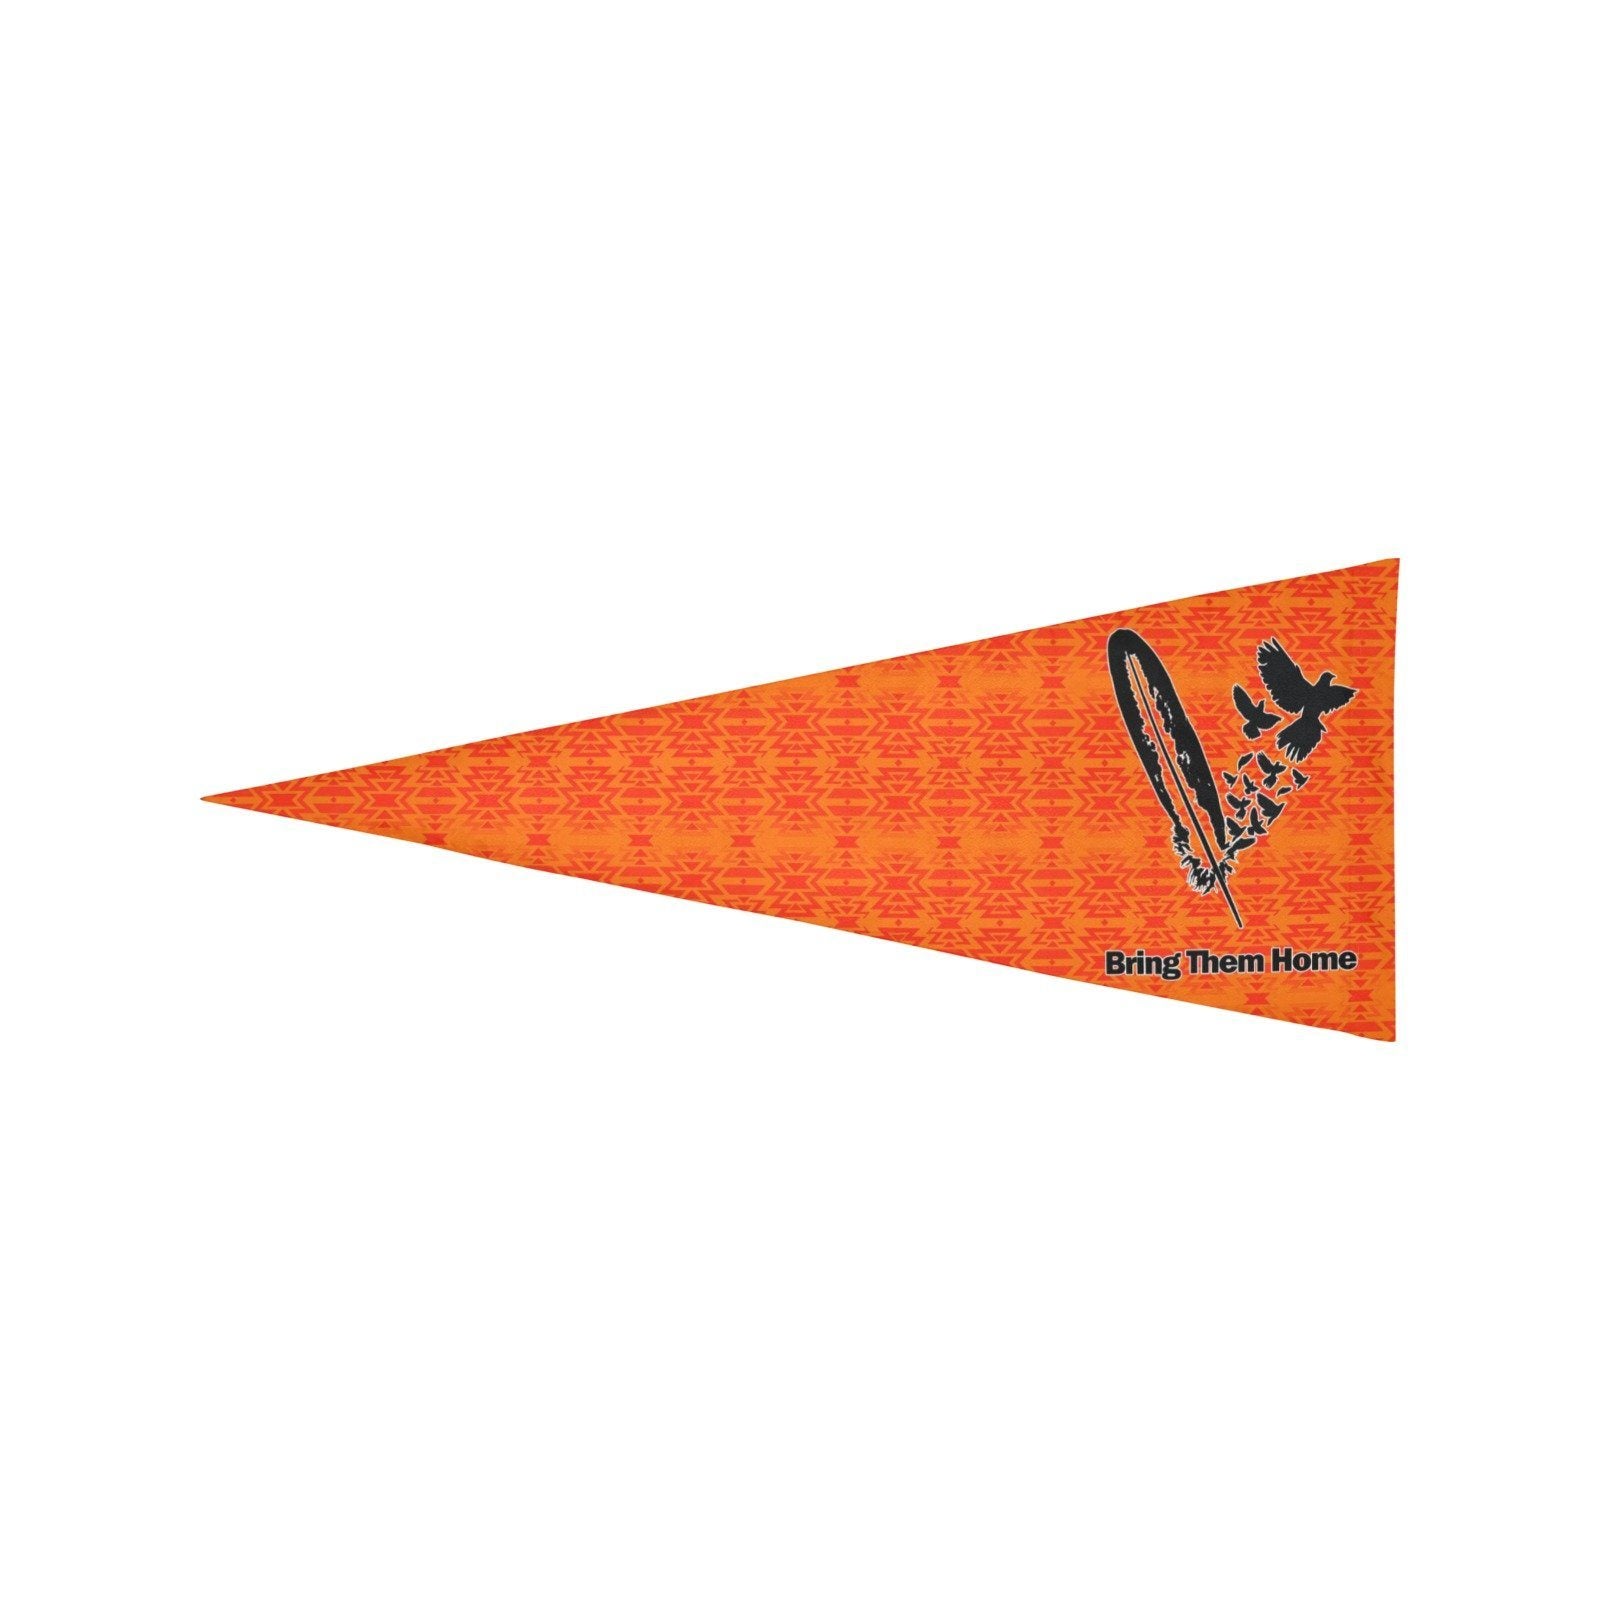 Fire Colors and Turquoise Orange Bring Them Home Trigonal Garden Flag 30"x12" Trigonal Garden Flag 30"x12" e-joyer 